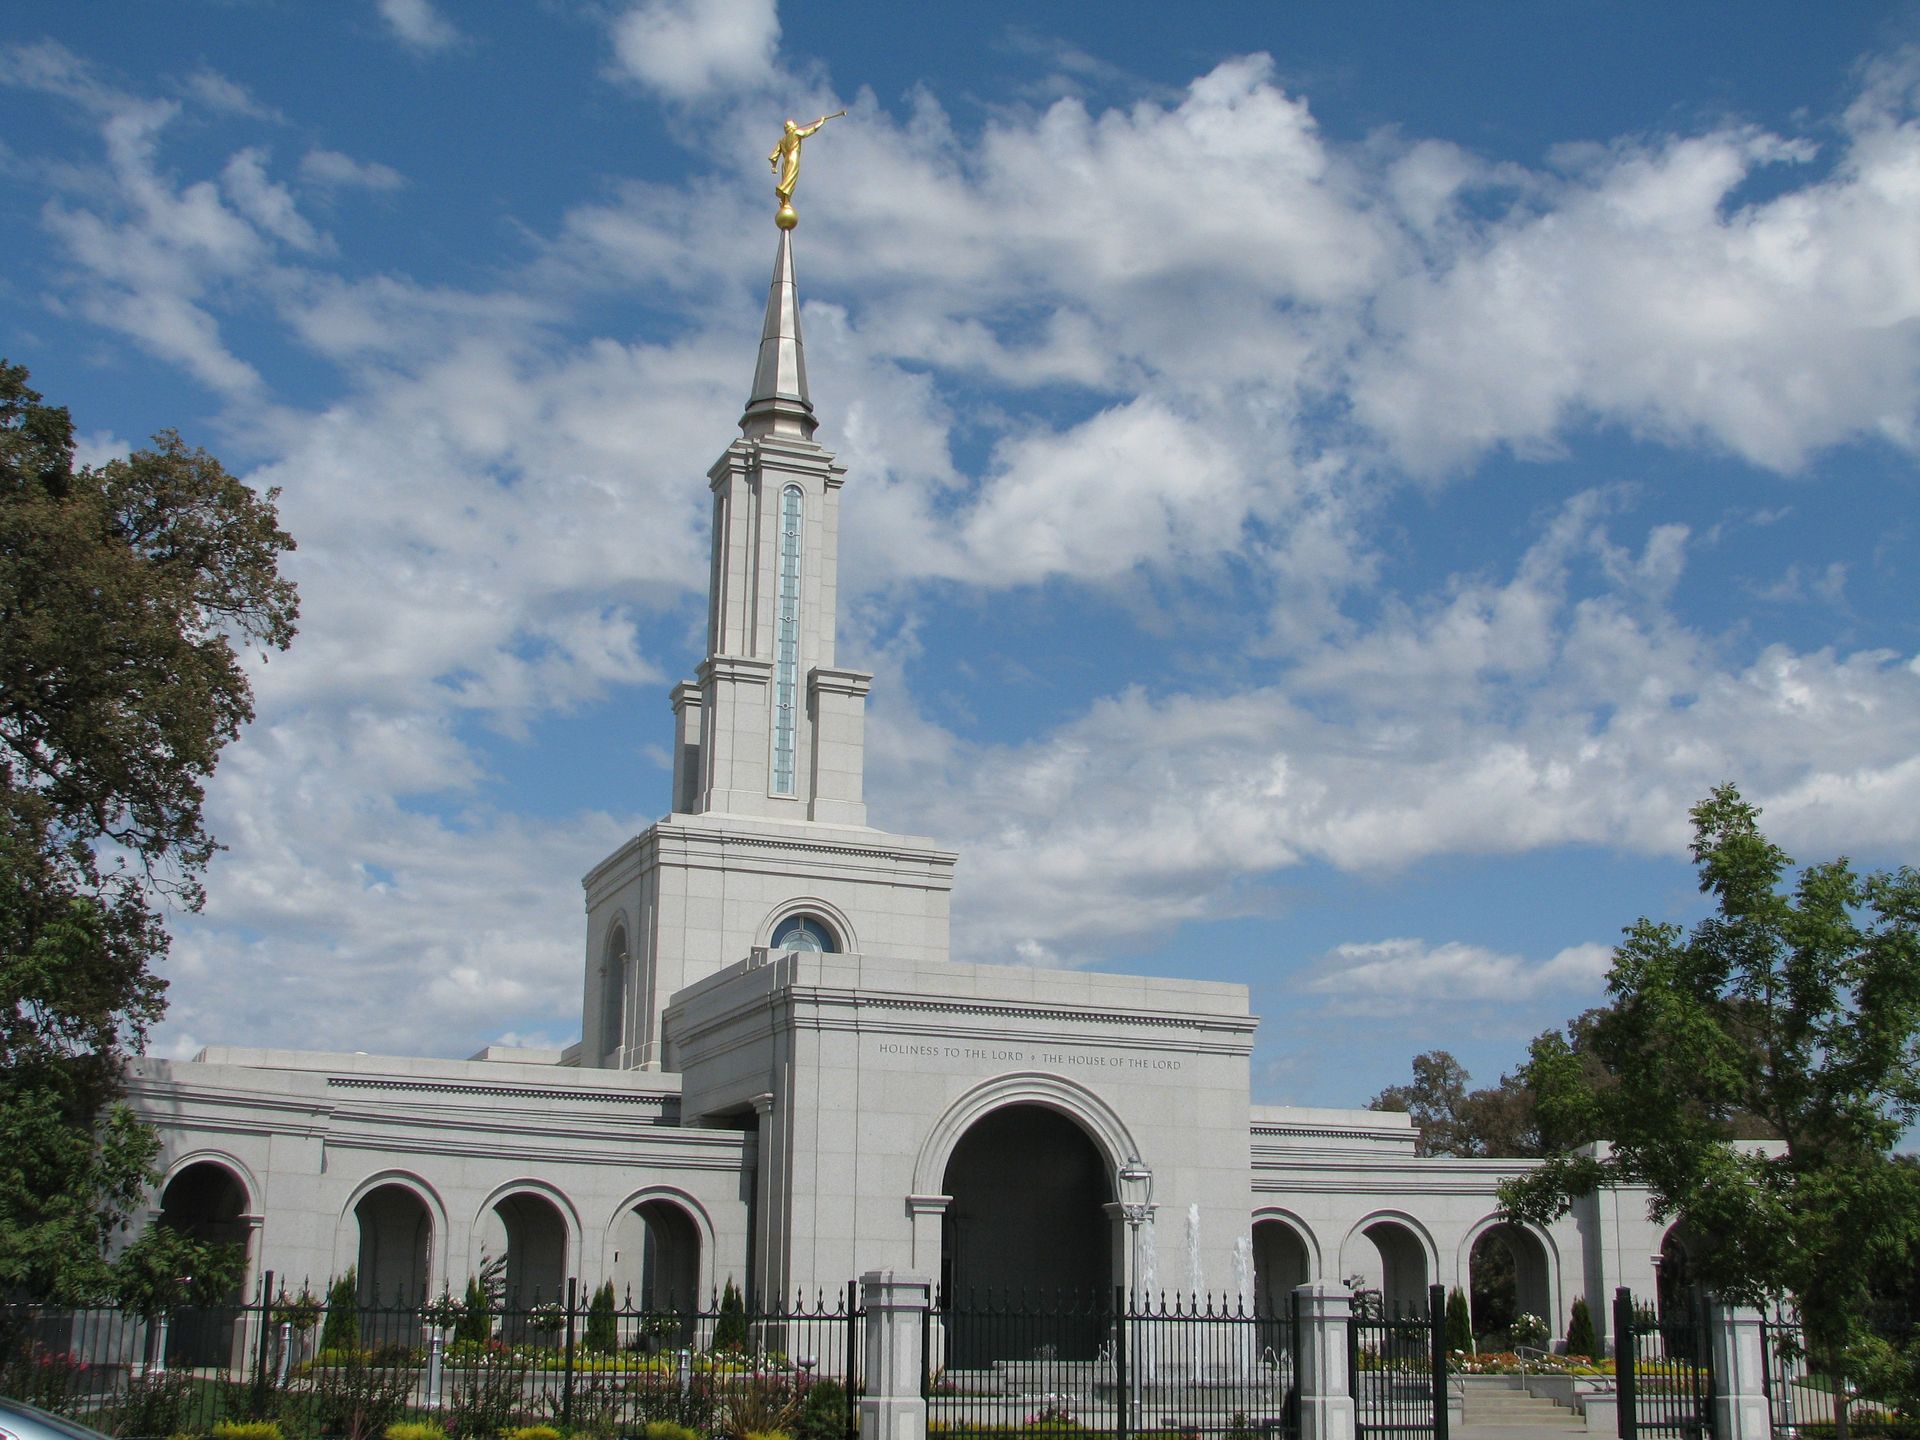 The Sacramento California Temple, including the entrance and scenery.